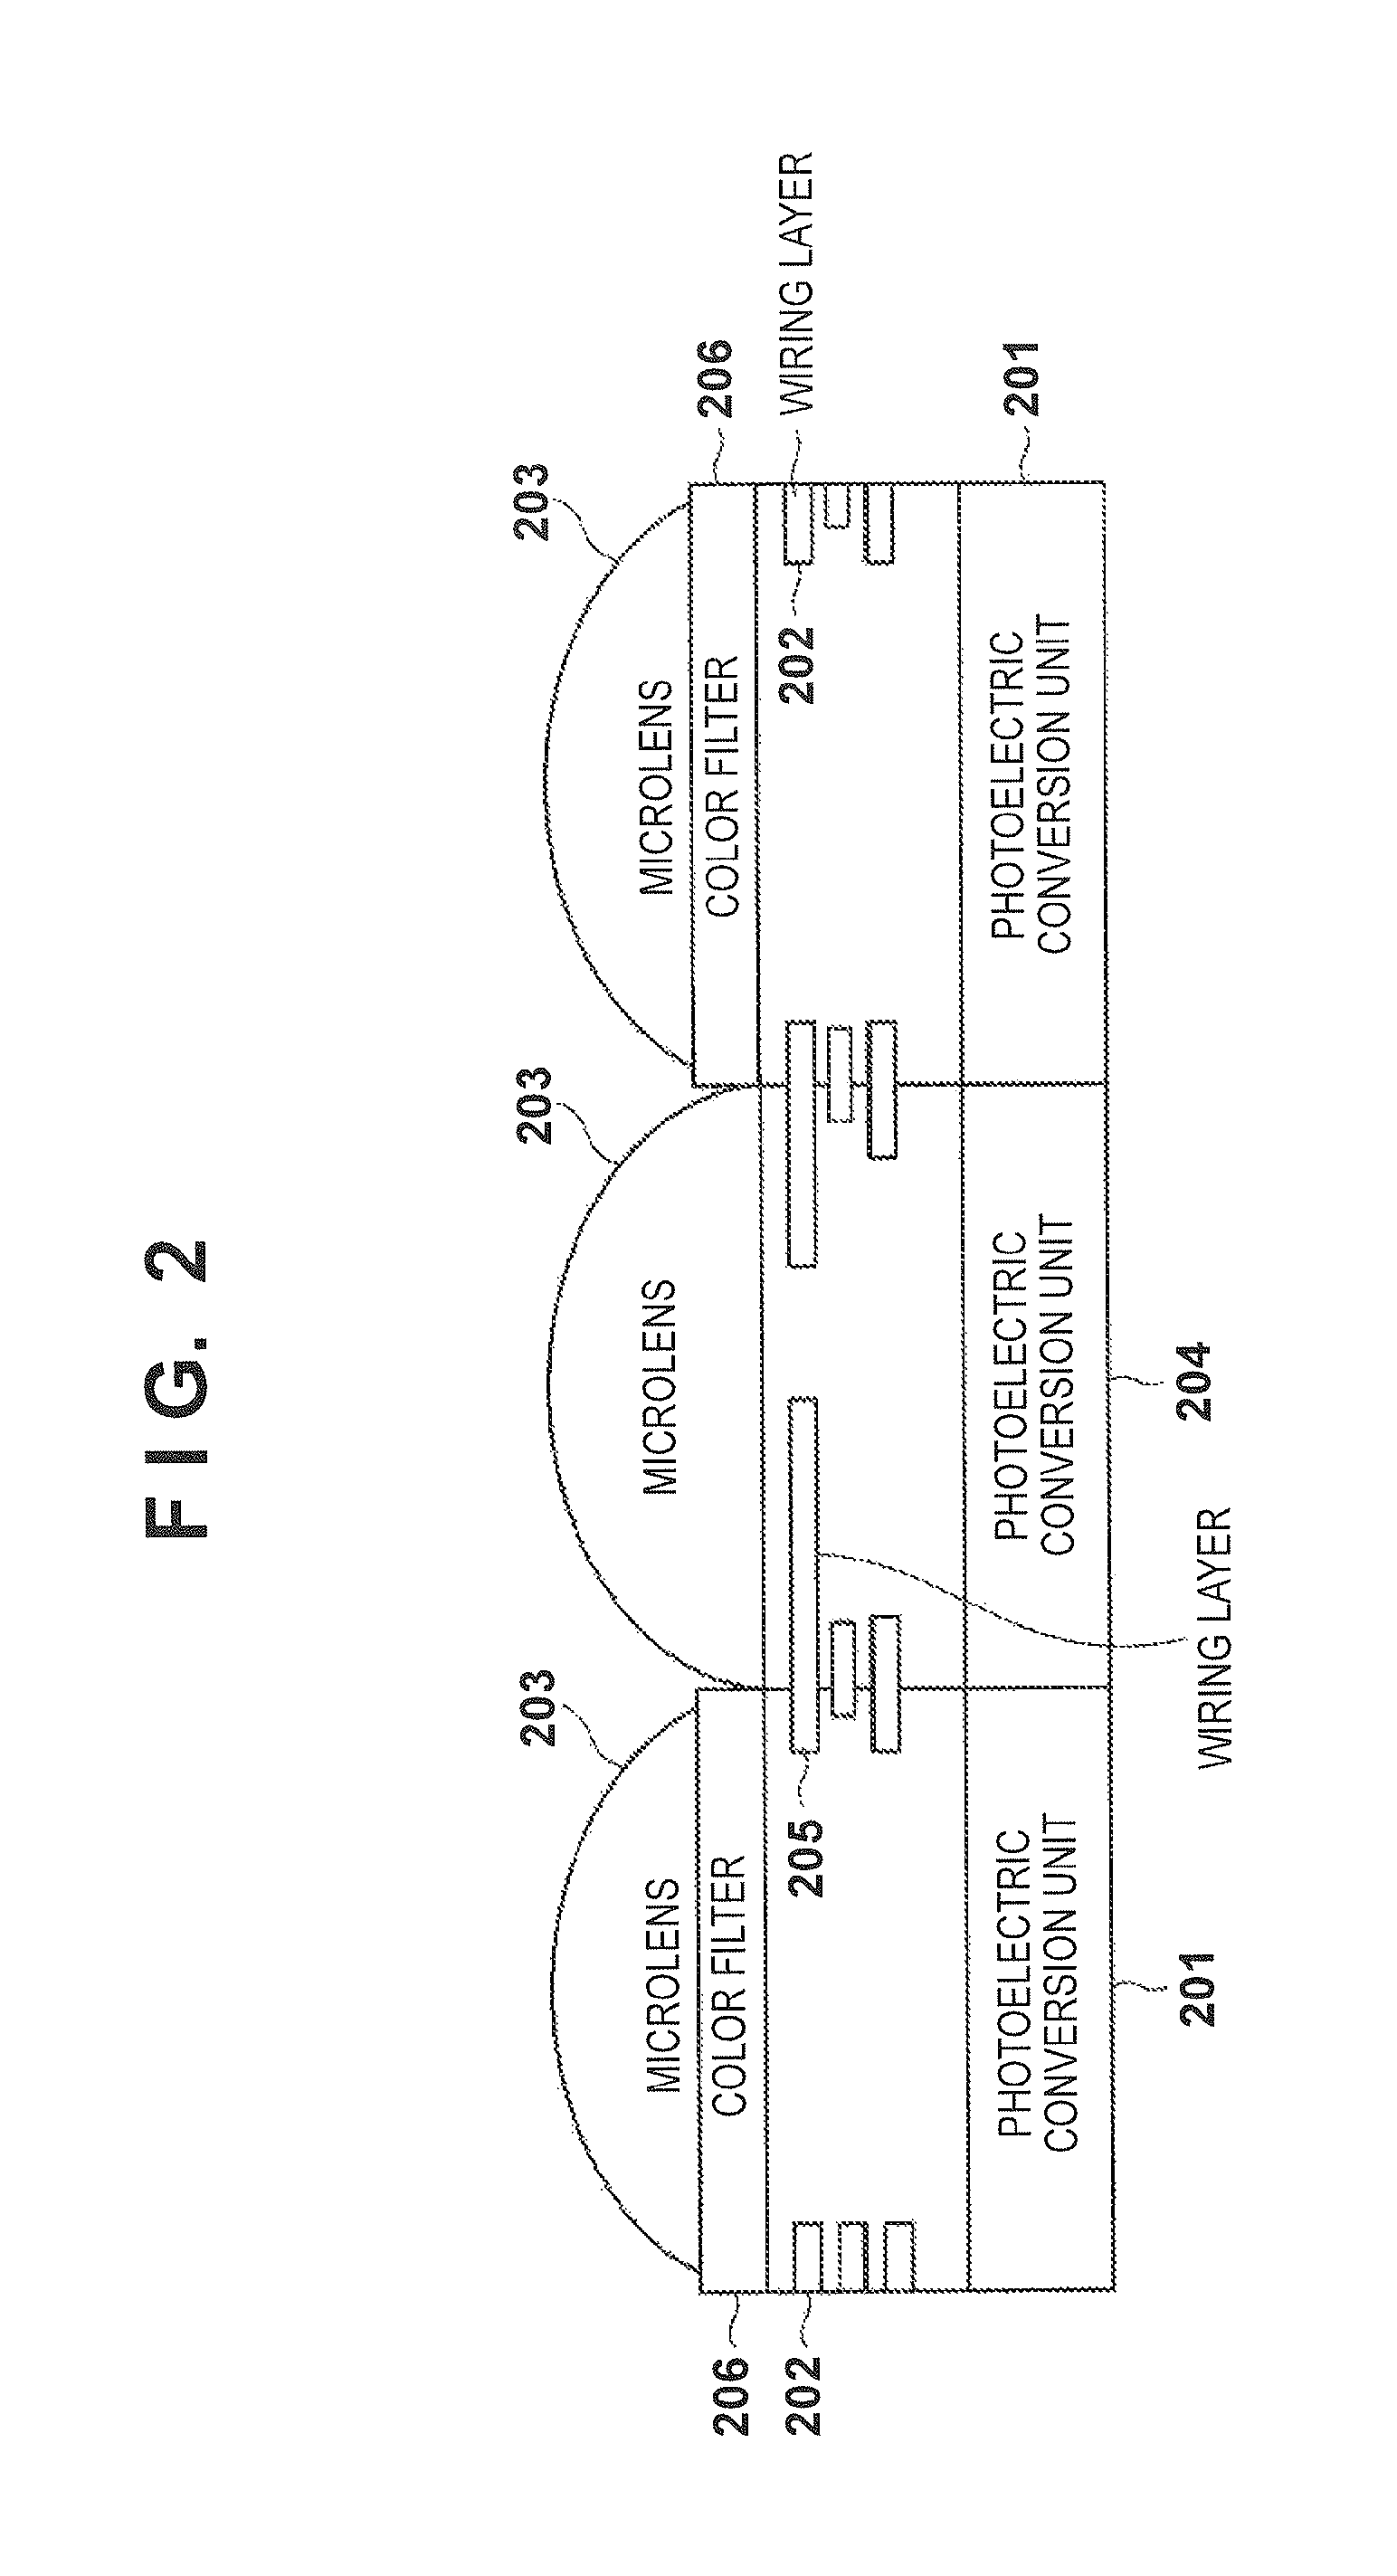 Pixel information management apparatus and image capture apparatus using the same